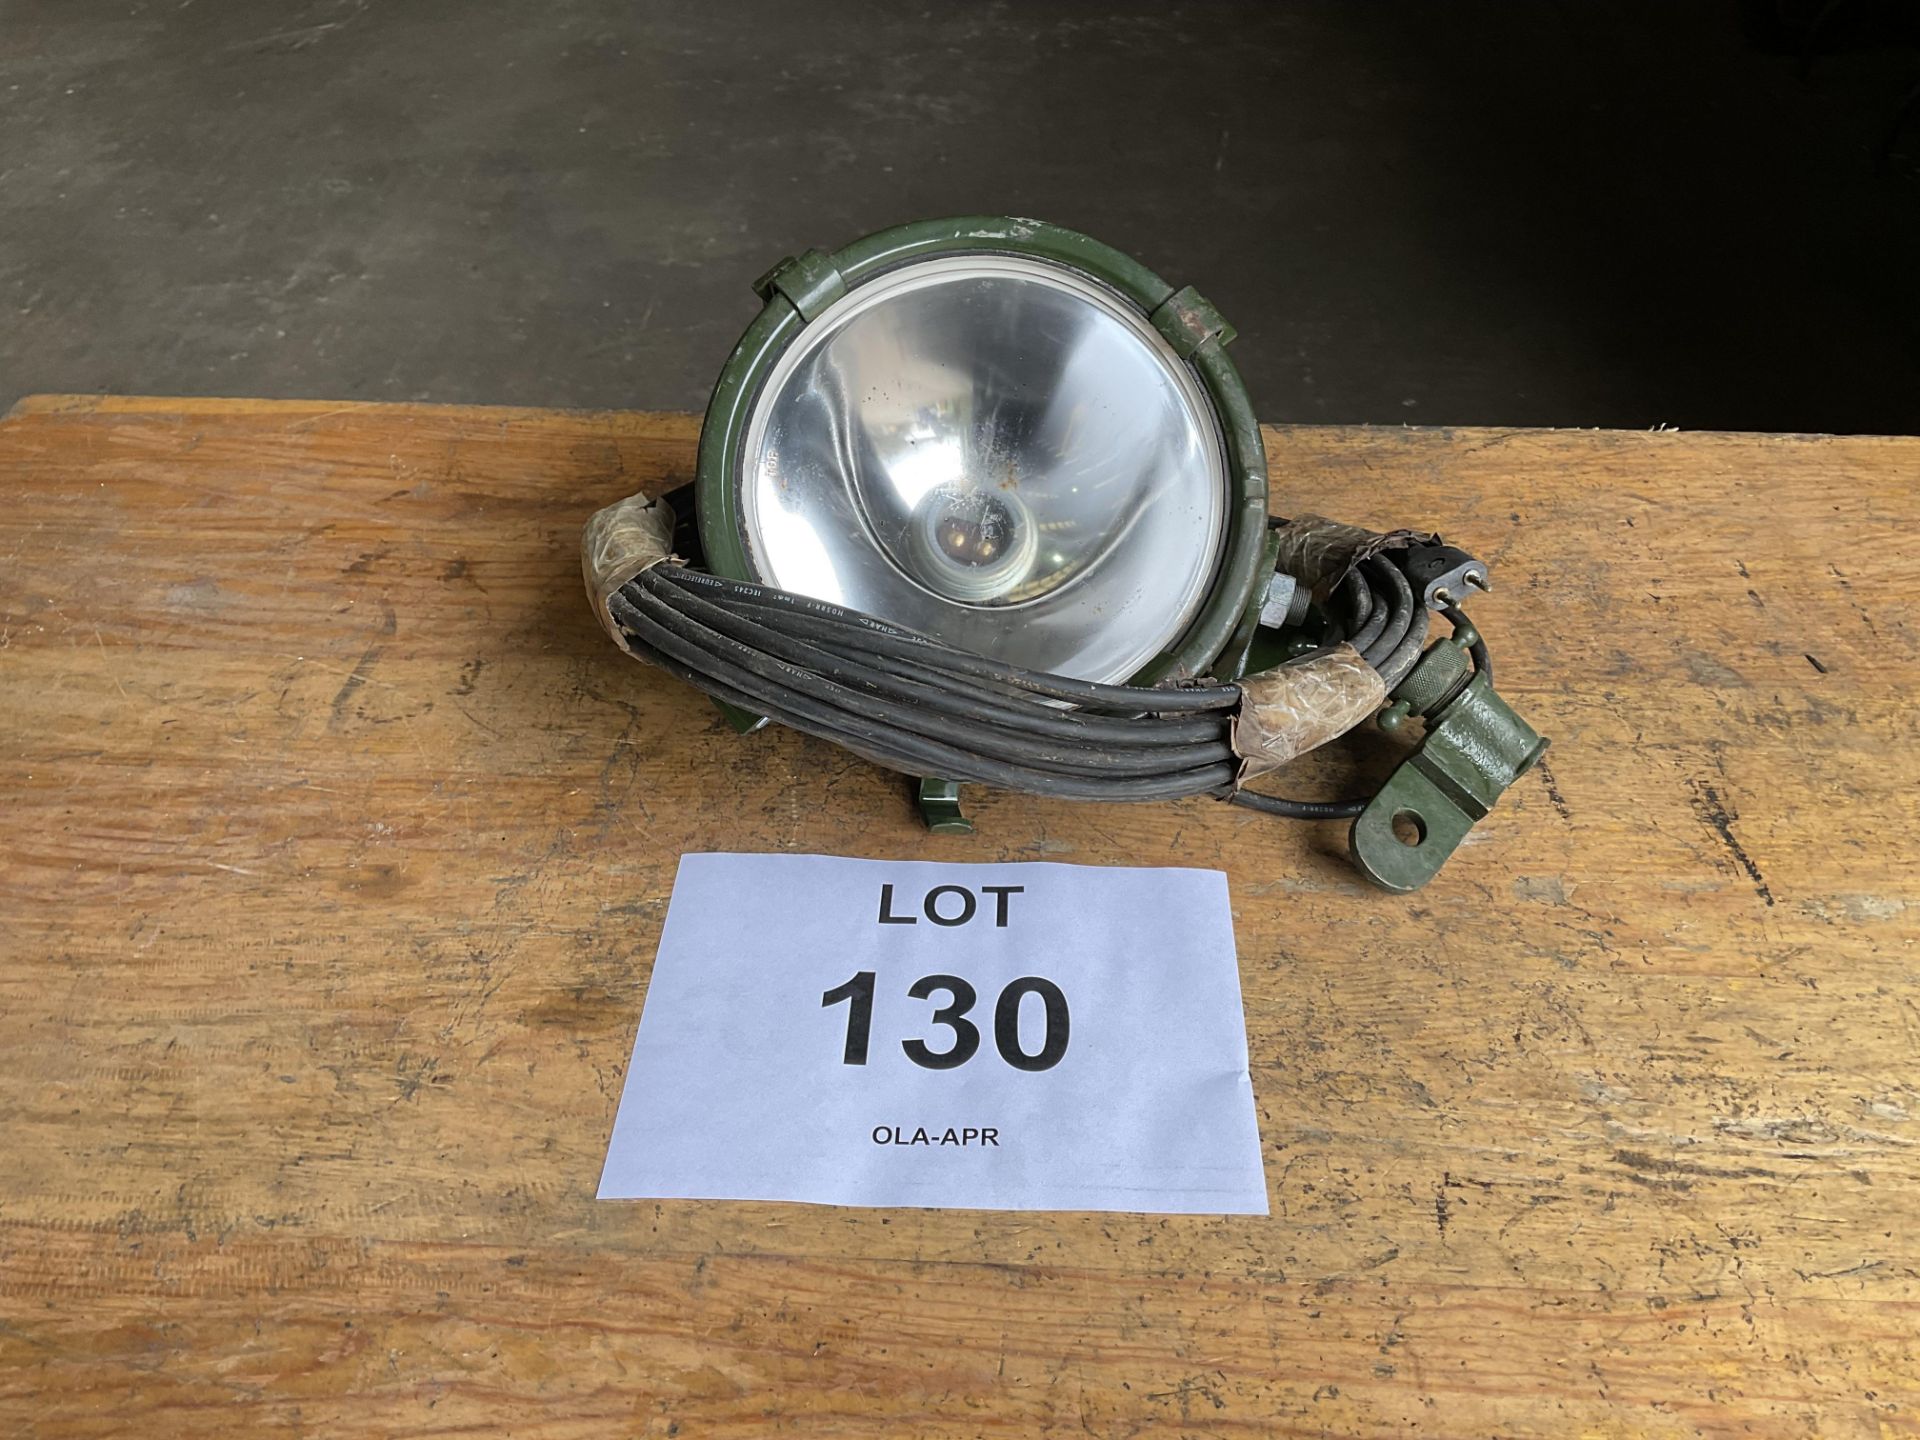 1X NOS FRANCIS FV SEARCH LIGHT C/ W LEAD AND BRACKET LAND ROVER, FERRET, ETC, ETC